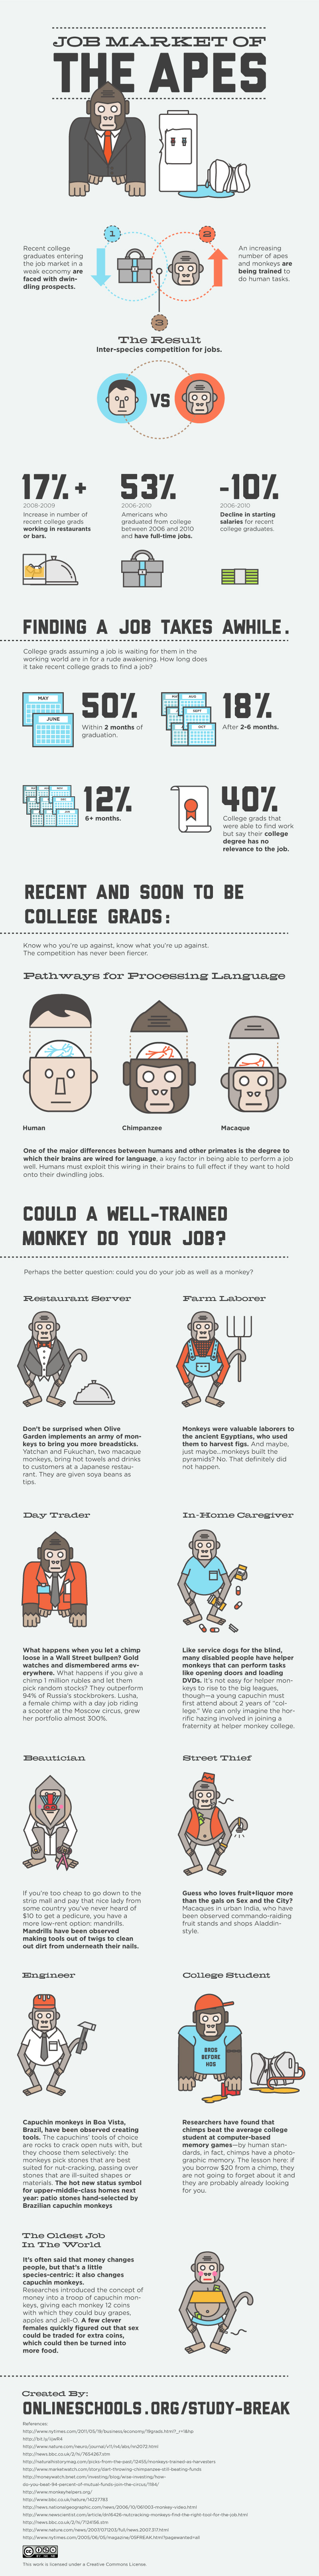 Could a Monkey Do Your Job?